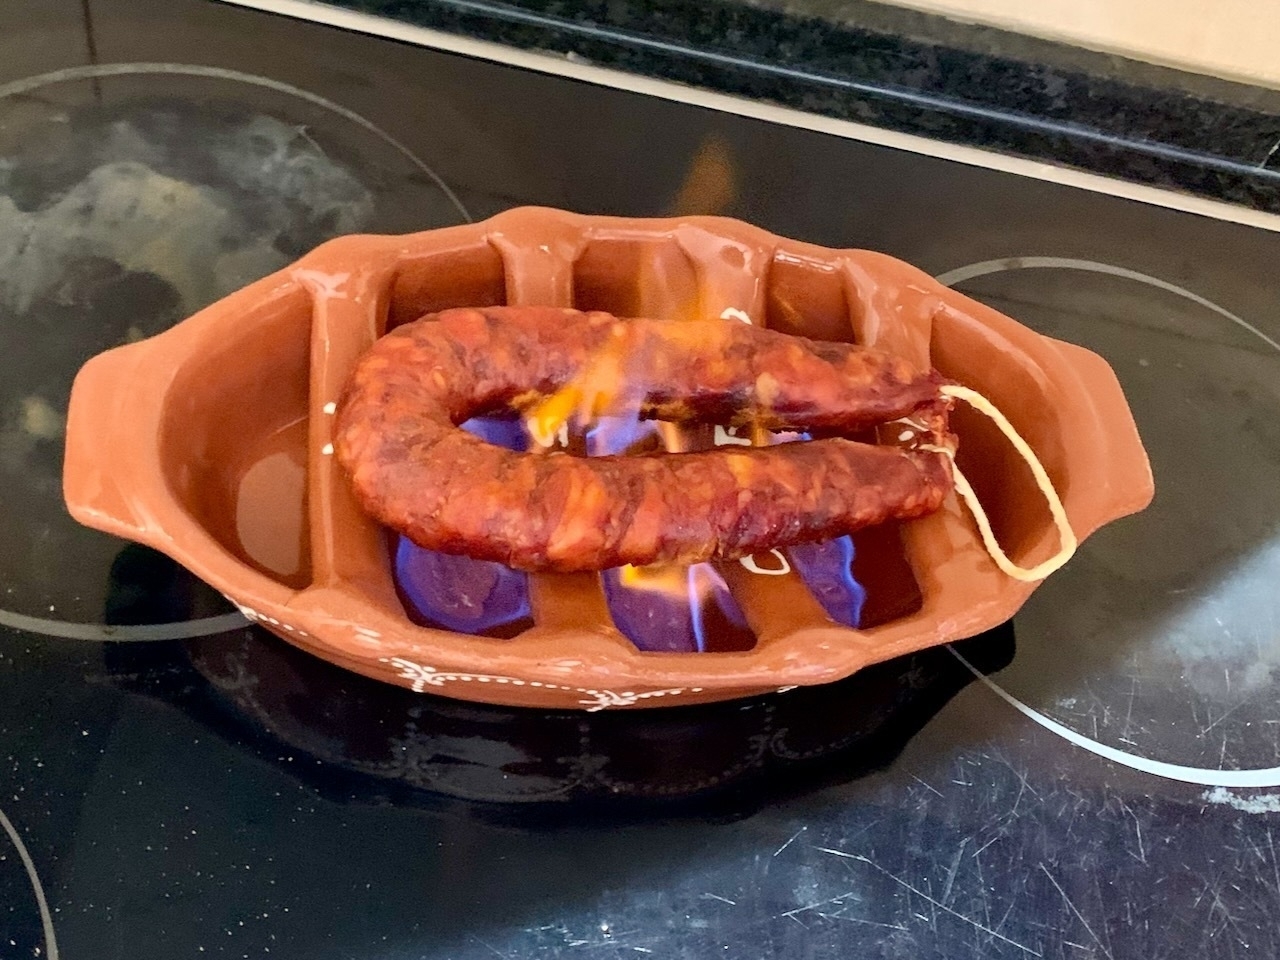 An ‘assador’, a Portuguese ceramic dish with bars across it, filled with lighter fluid gel that’s been set alight, grilling a chouriço Portuguese sausage.